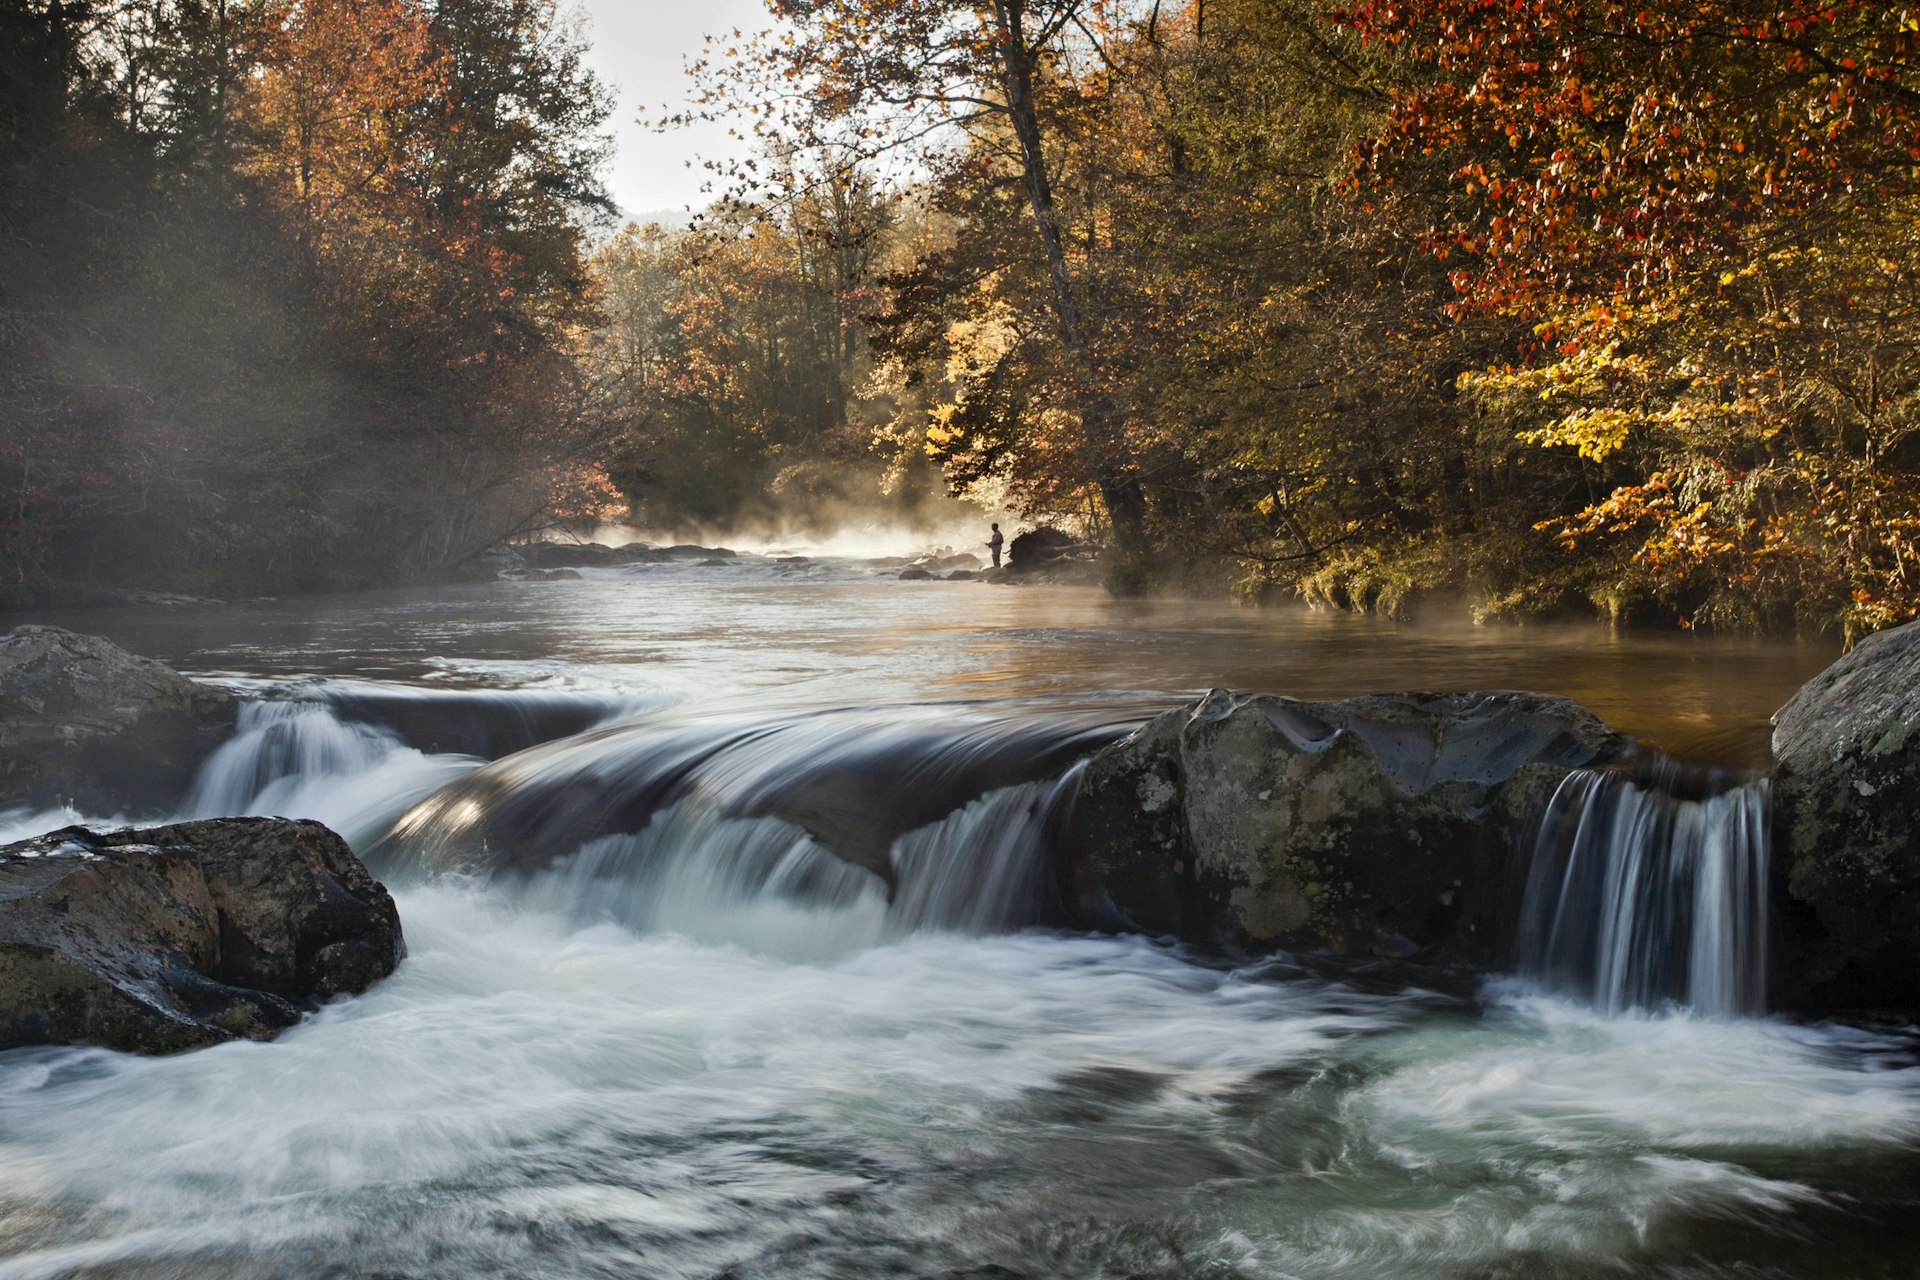 A fisher stands in the background of an autumn scene with mist still floating on the river and water flowing over rocks in the foreground